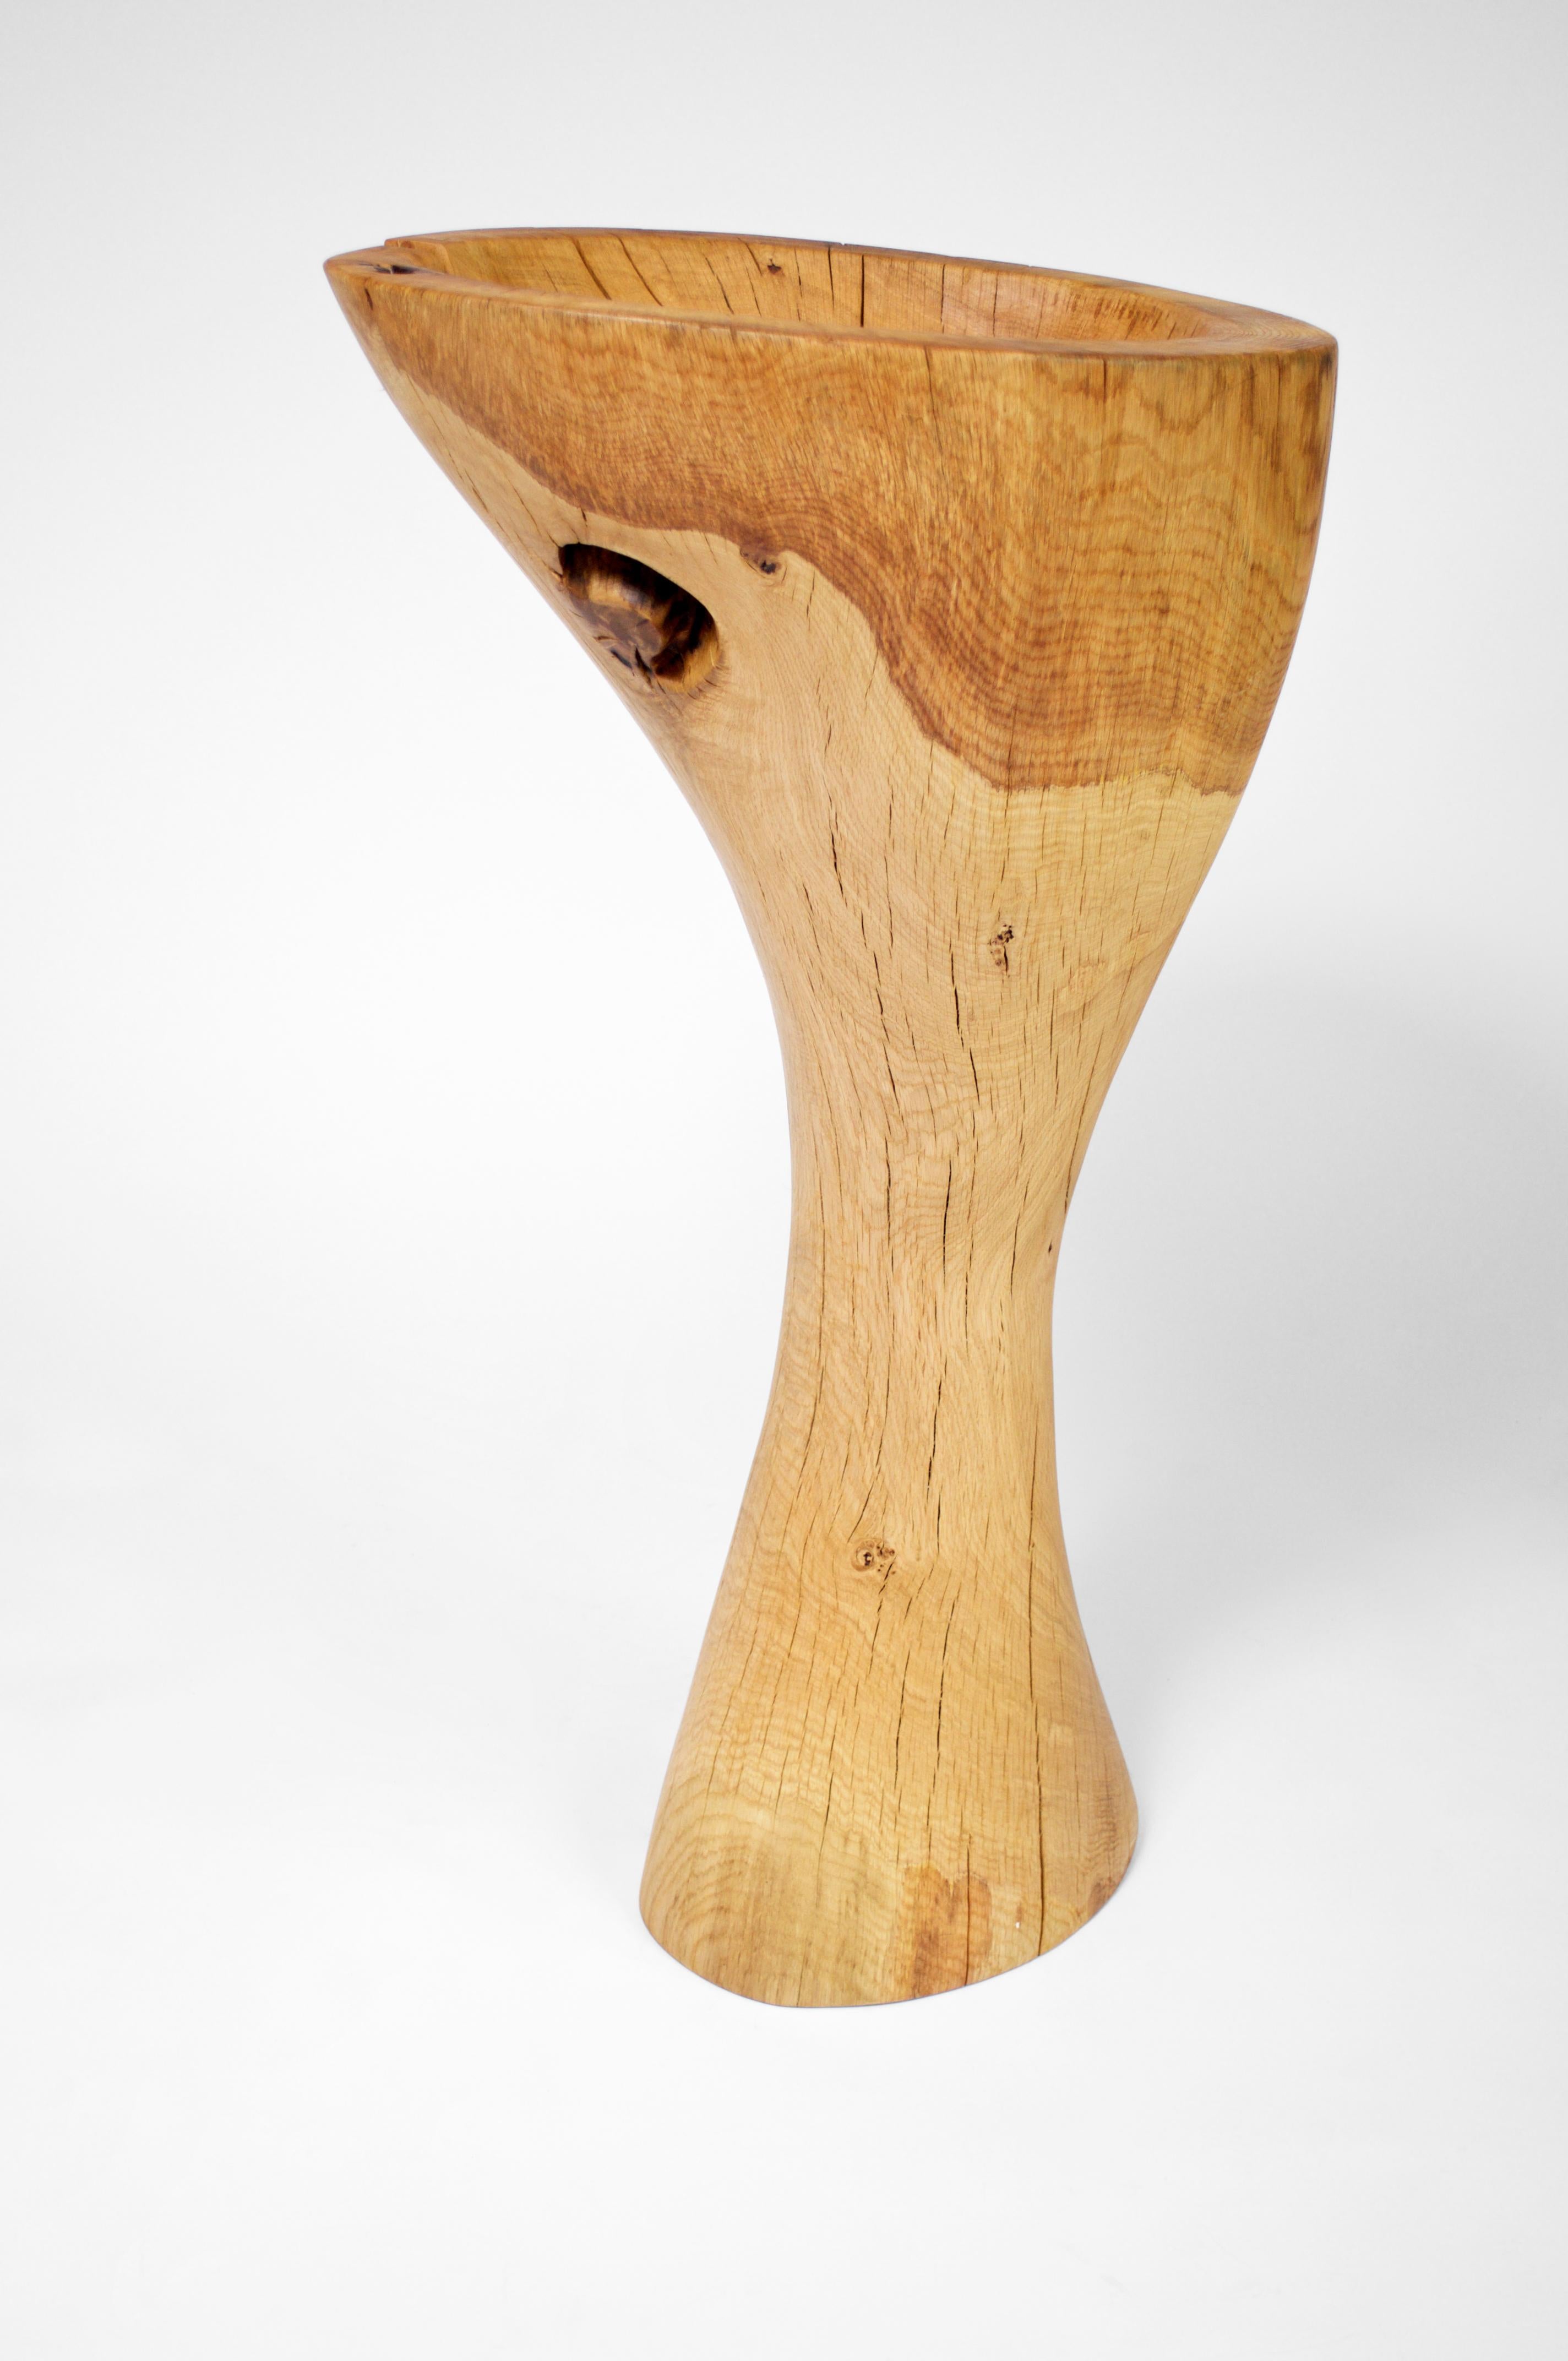 Vessel 1245 by Jörg Pietschmann
Dimensions: D 53 x W 47 x H 104 cm 
Materials: Oak. 
Finish: Polished oil finish.


Carved out of from a curved oak trunk.
In Pietschmann’s sculptures, trees that for centuries were part of a landscape and founded in